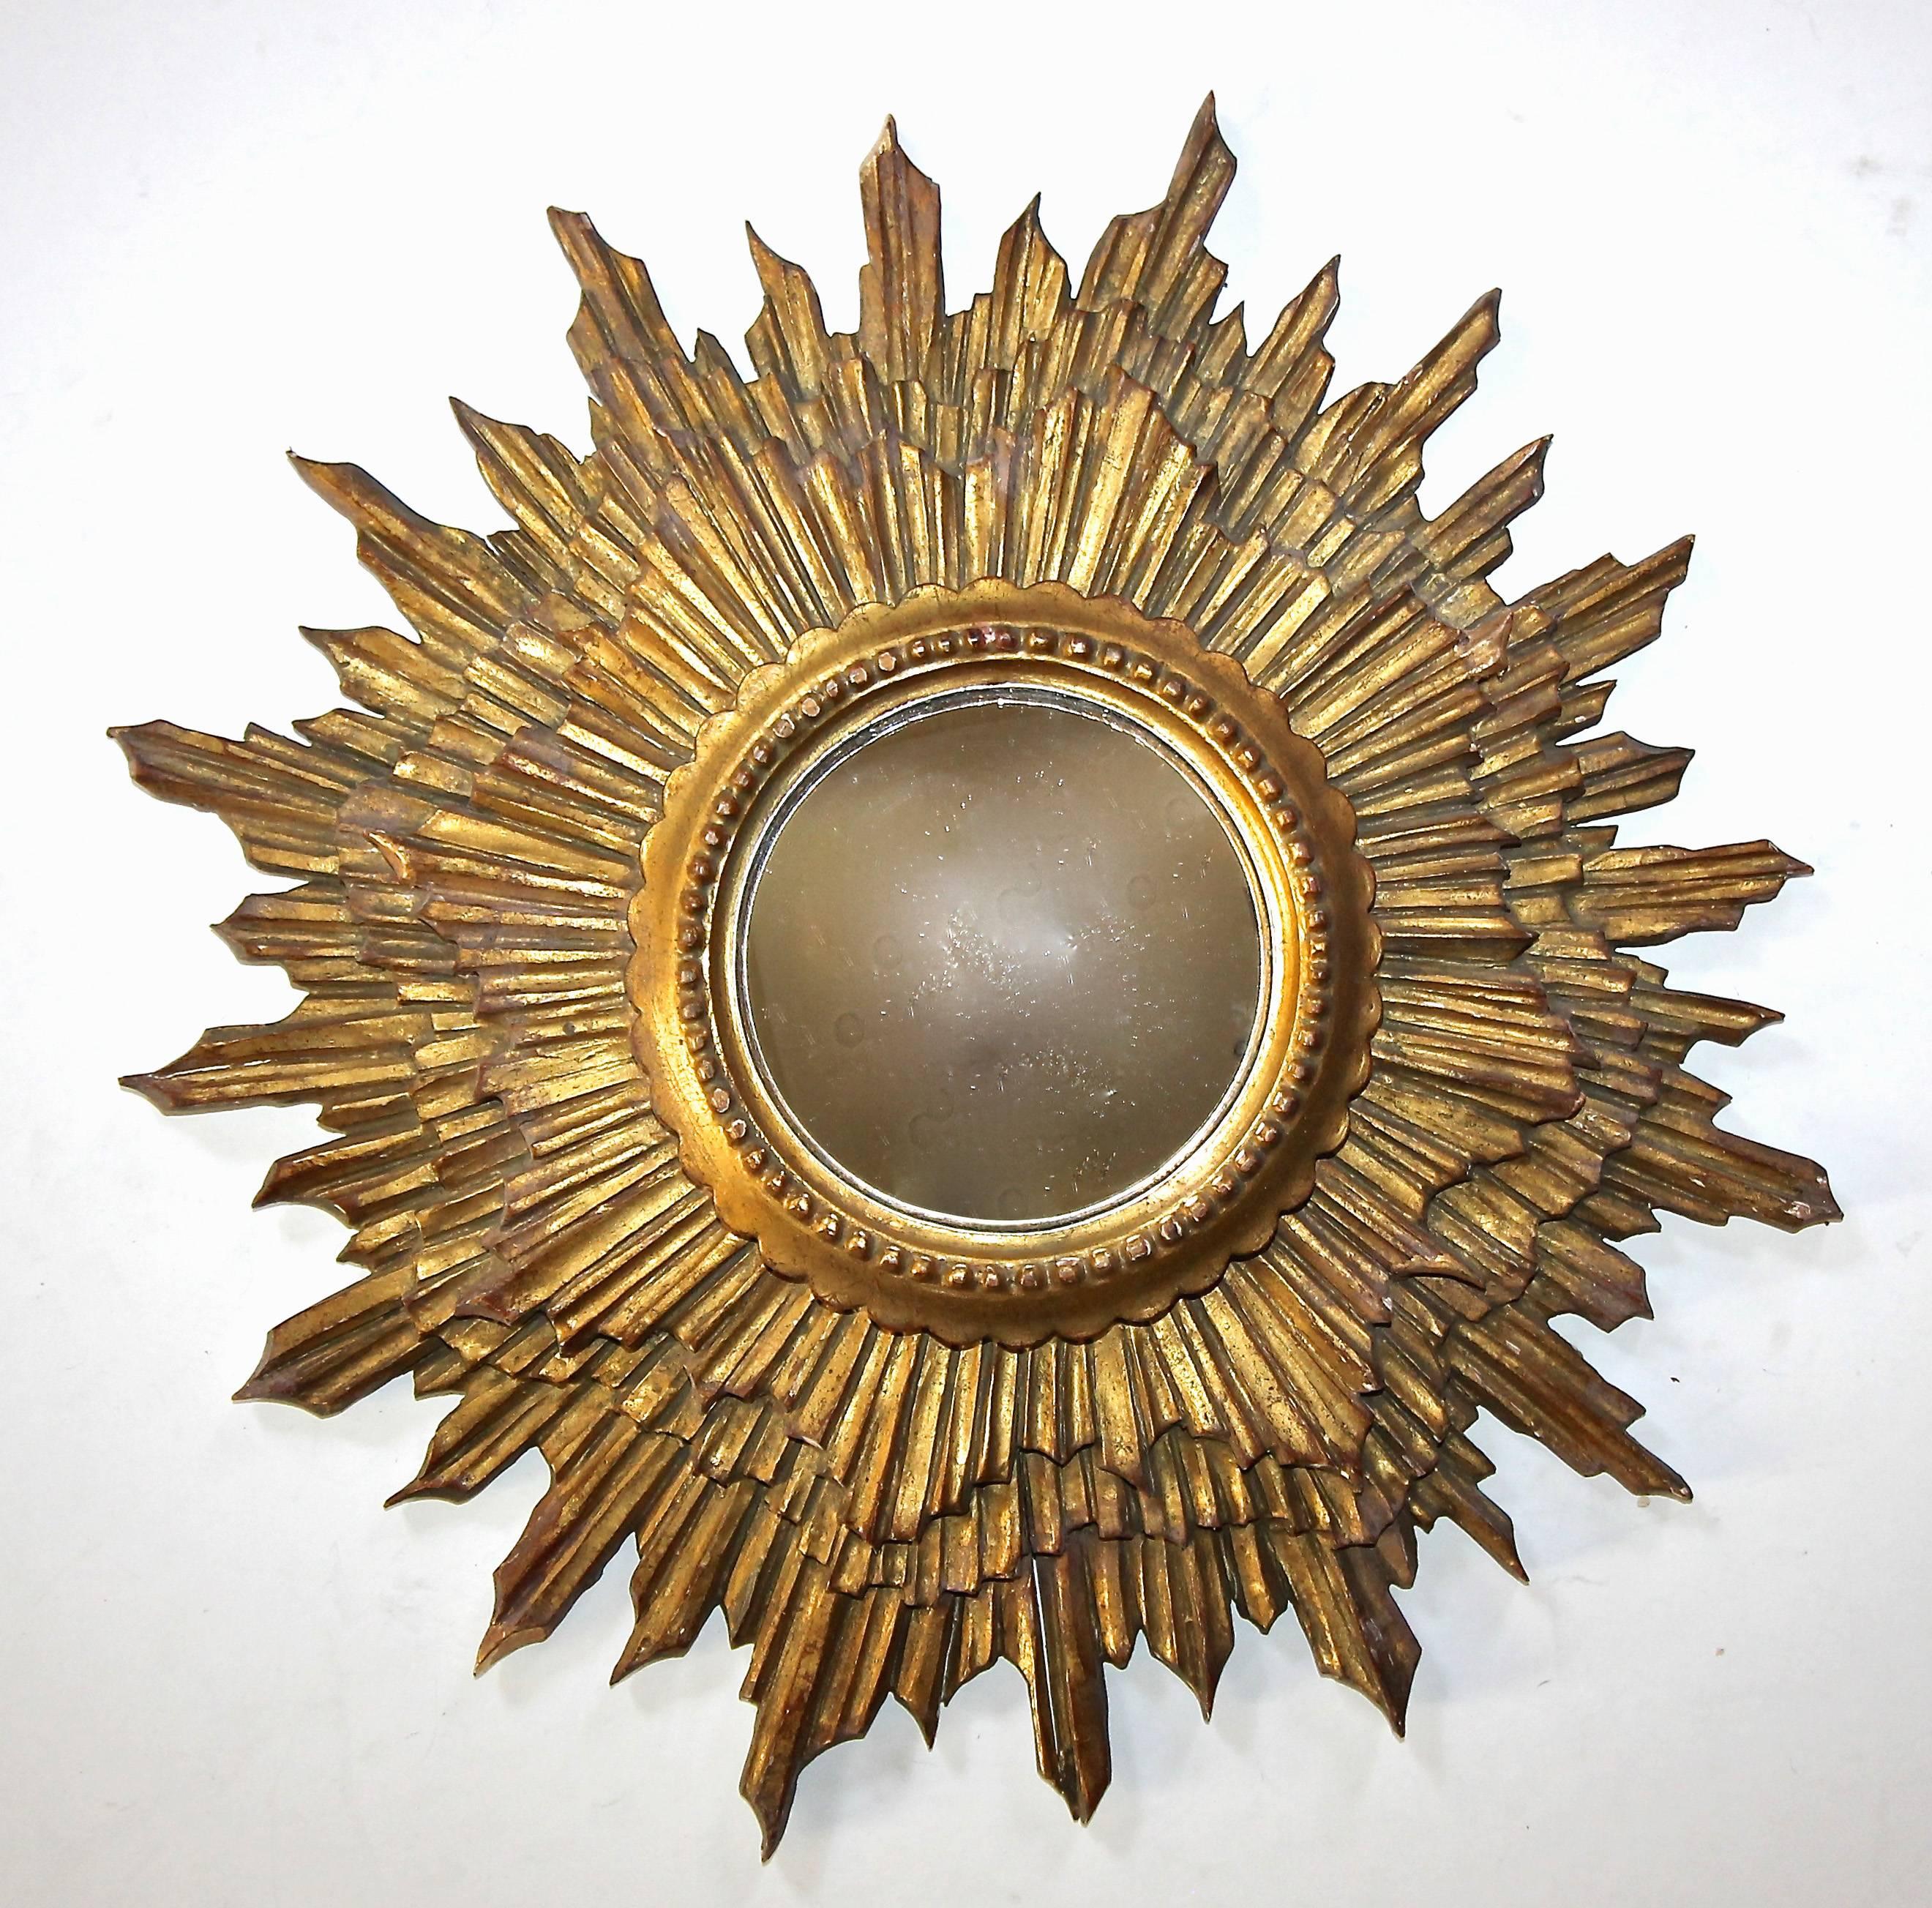 Italian made 1940s sunburst or starburst hand-carved giltwood wall mirror with inset convex mirror. Diameter of mirror 5.25".

This item is located in our Dallas showroom.